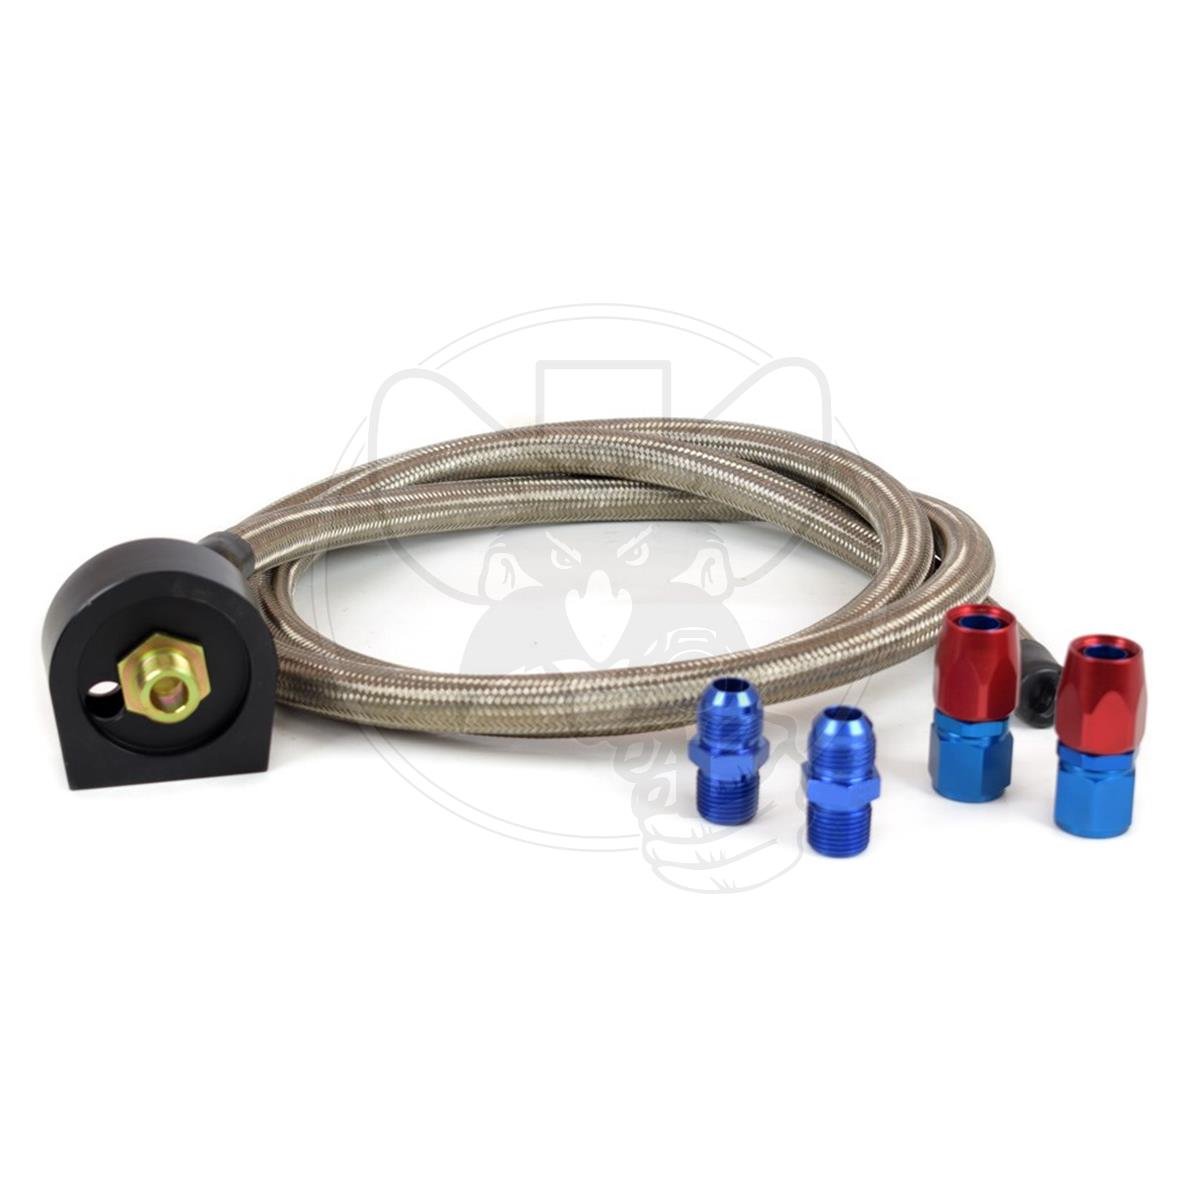 CANTON ACCUSUMP INSTALL KIT 18MM THREAD STANDARD GASKET SIZE